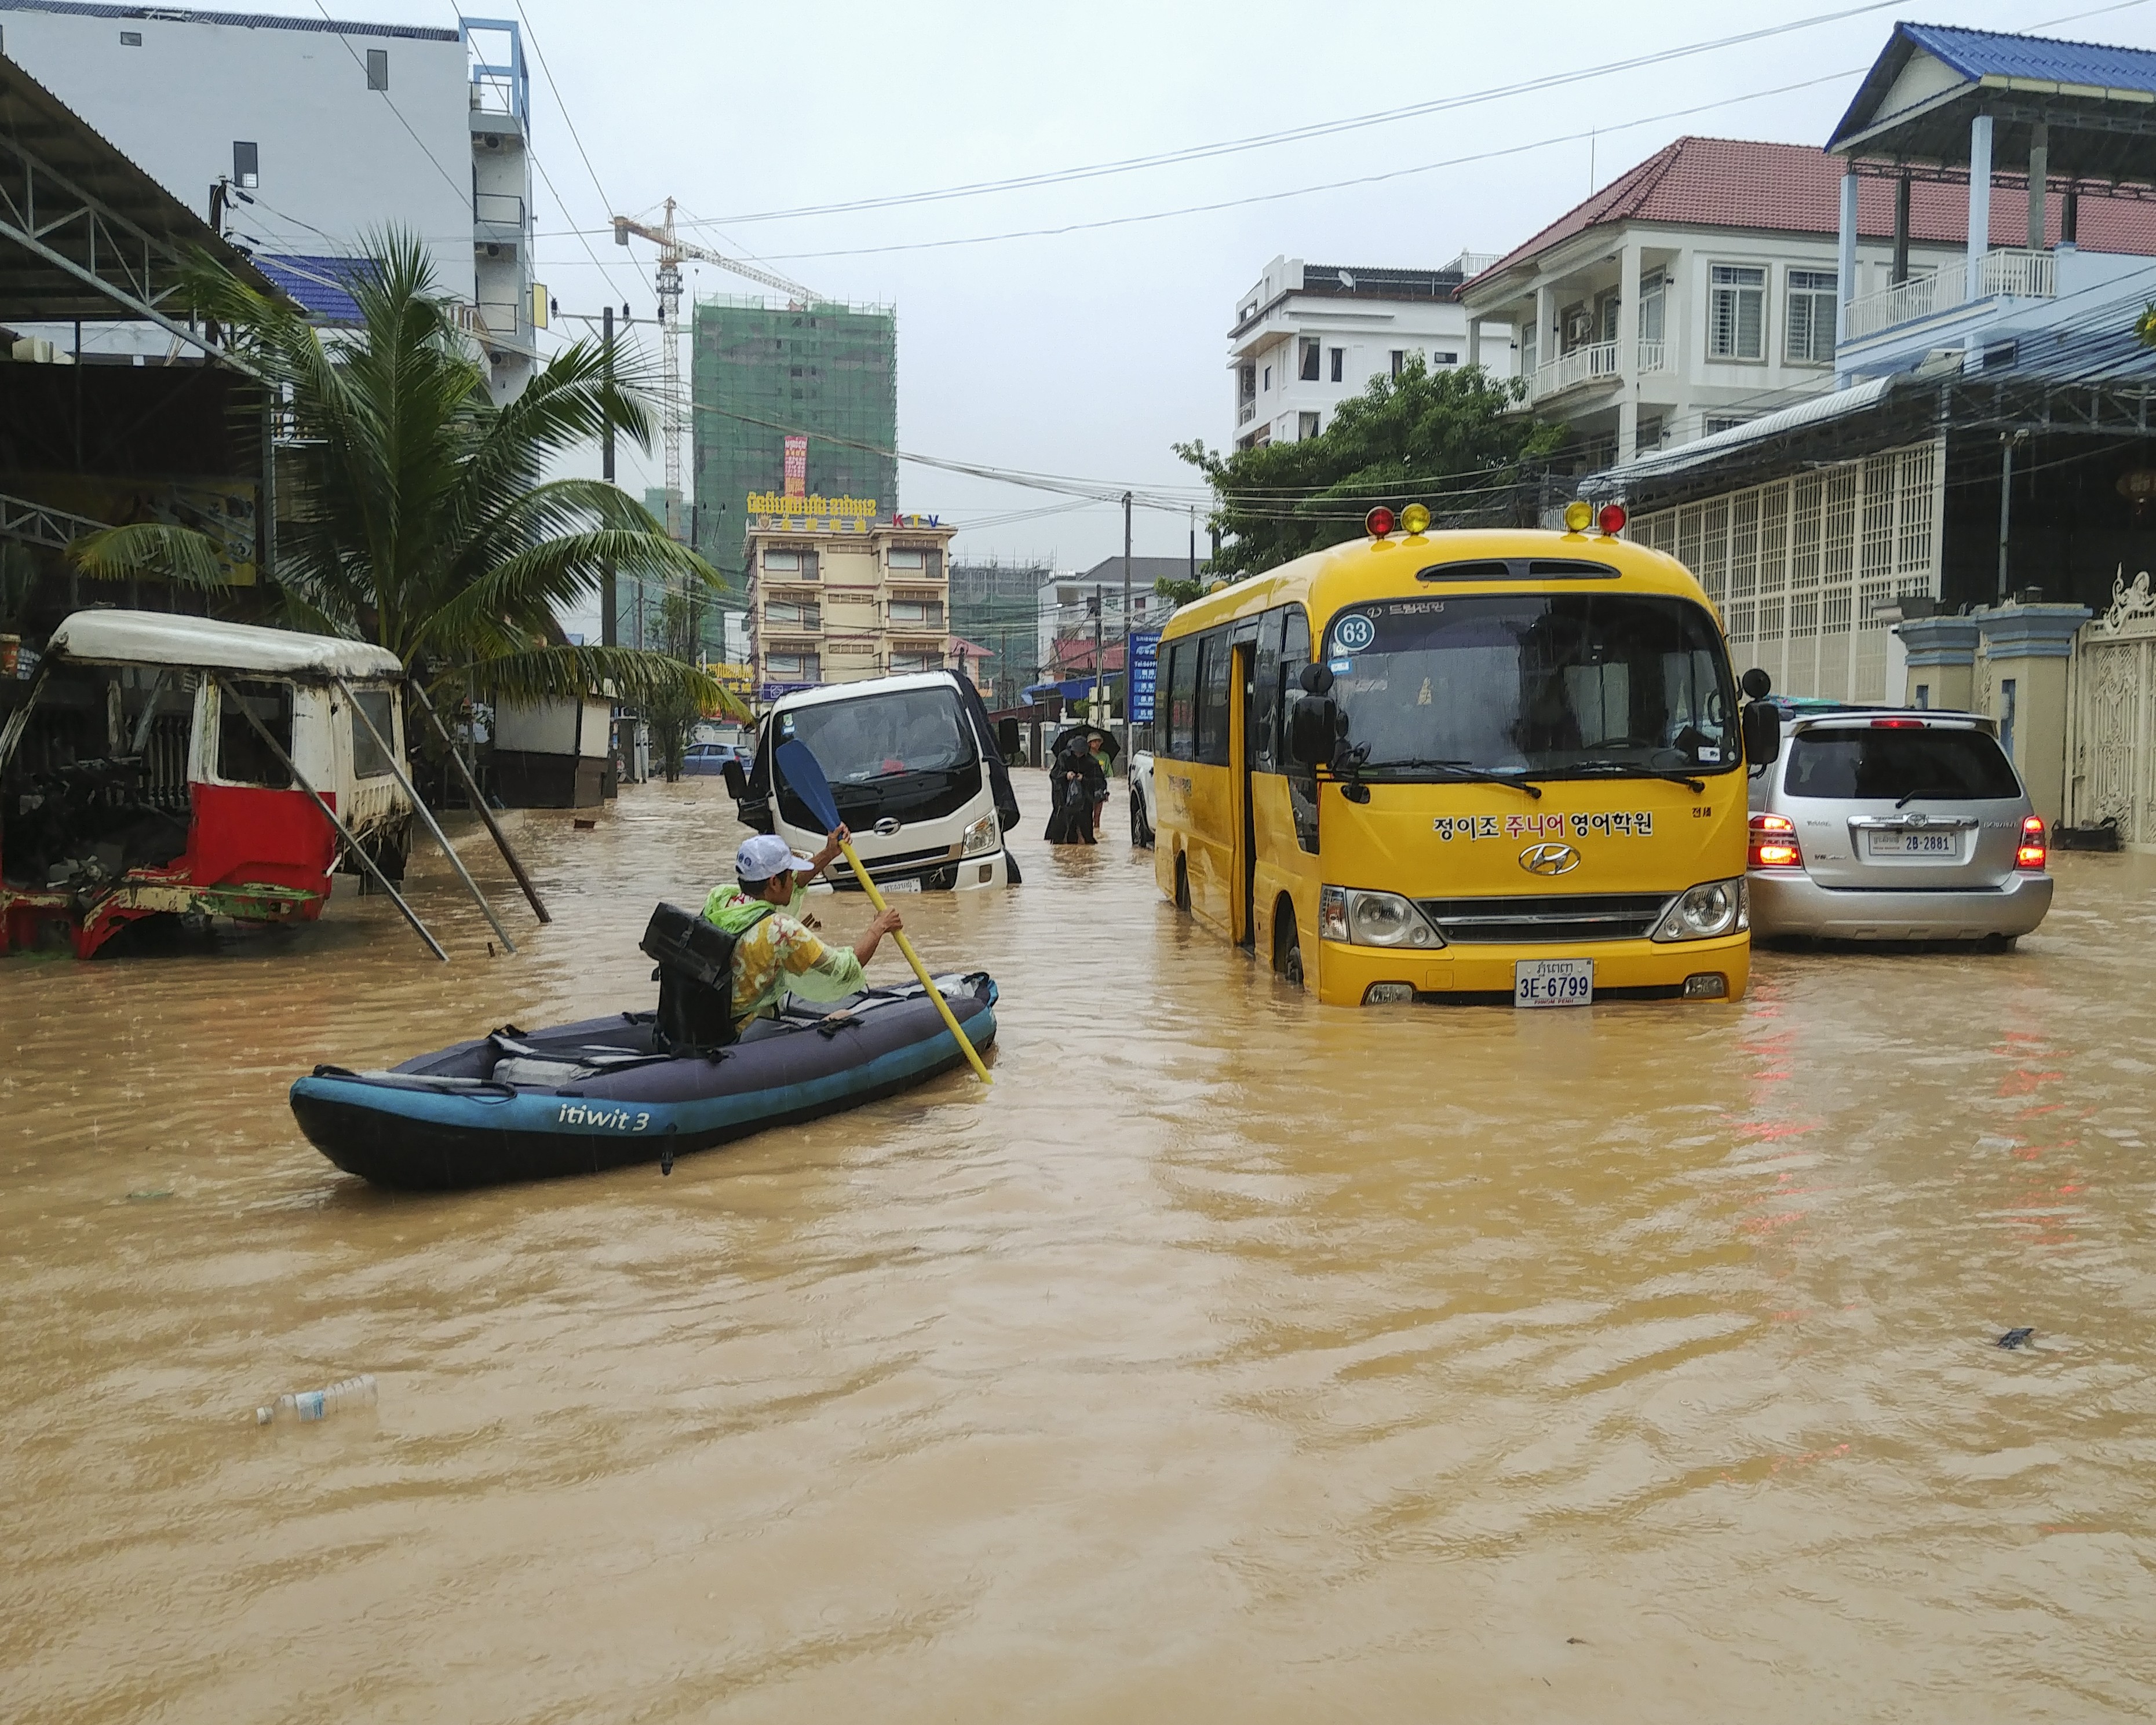 Submerged cars, buses and motorbikes were abandoned throughout the city during heavy flooding in Sihanoukville, Cambodia, early last month. Photo: Mother Nature